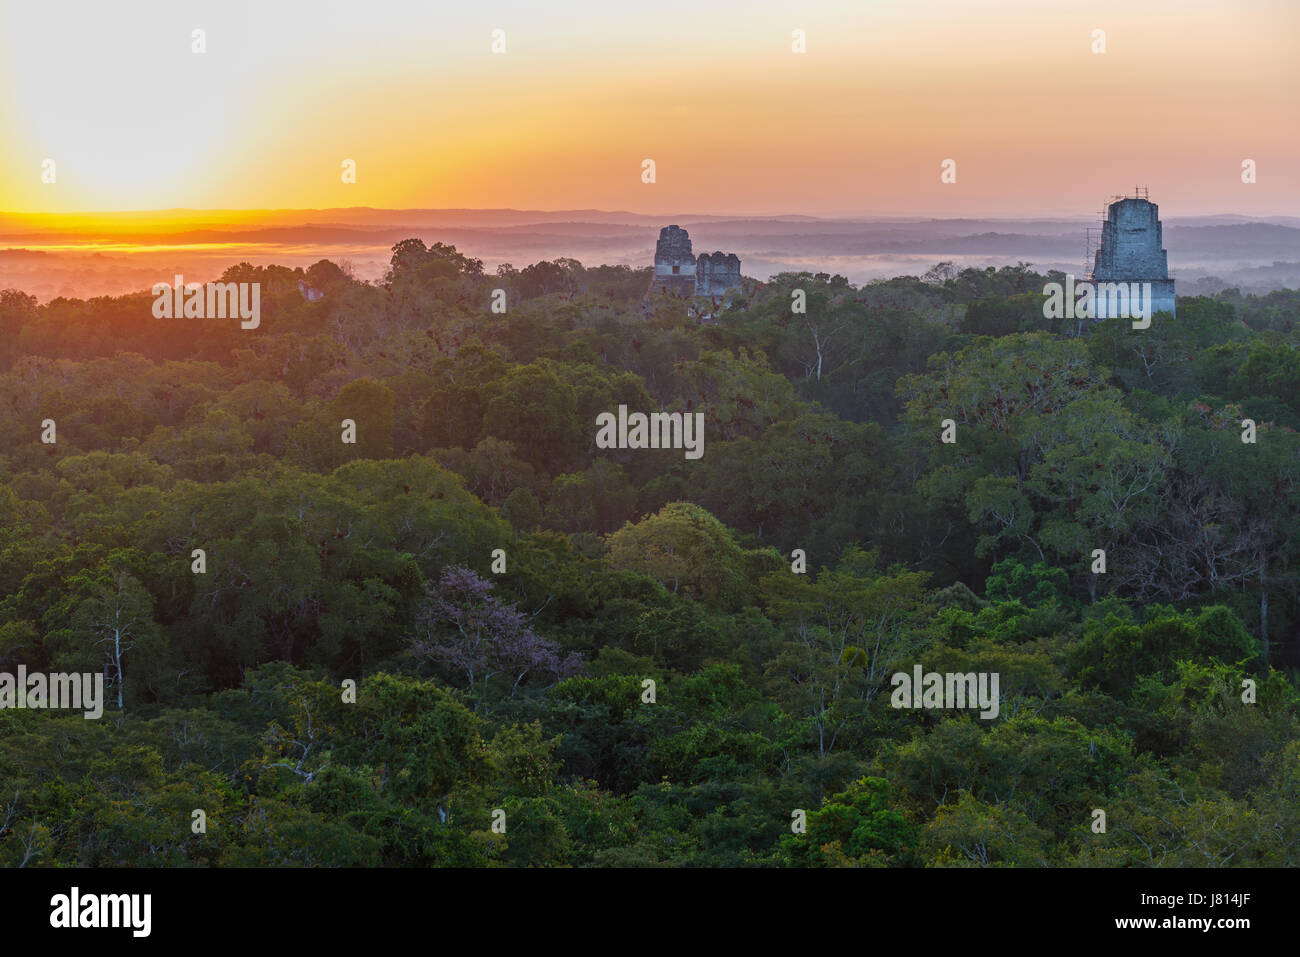 The Mayan pyramids of Tikal above the rainforest canopy at sunrise in the Peten jungle near Flores, Guatemala. Stock Photo